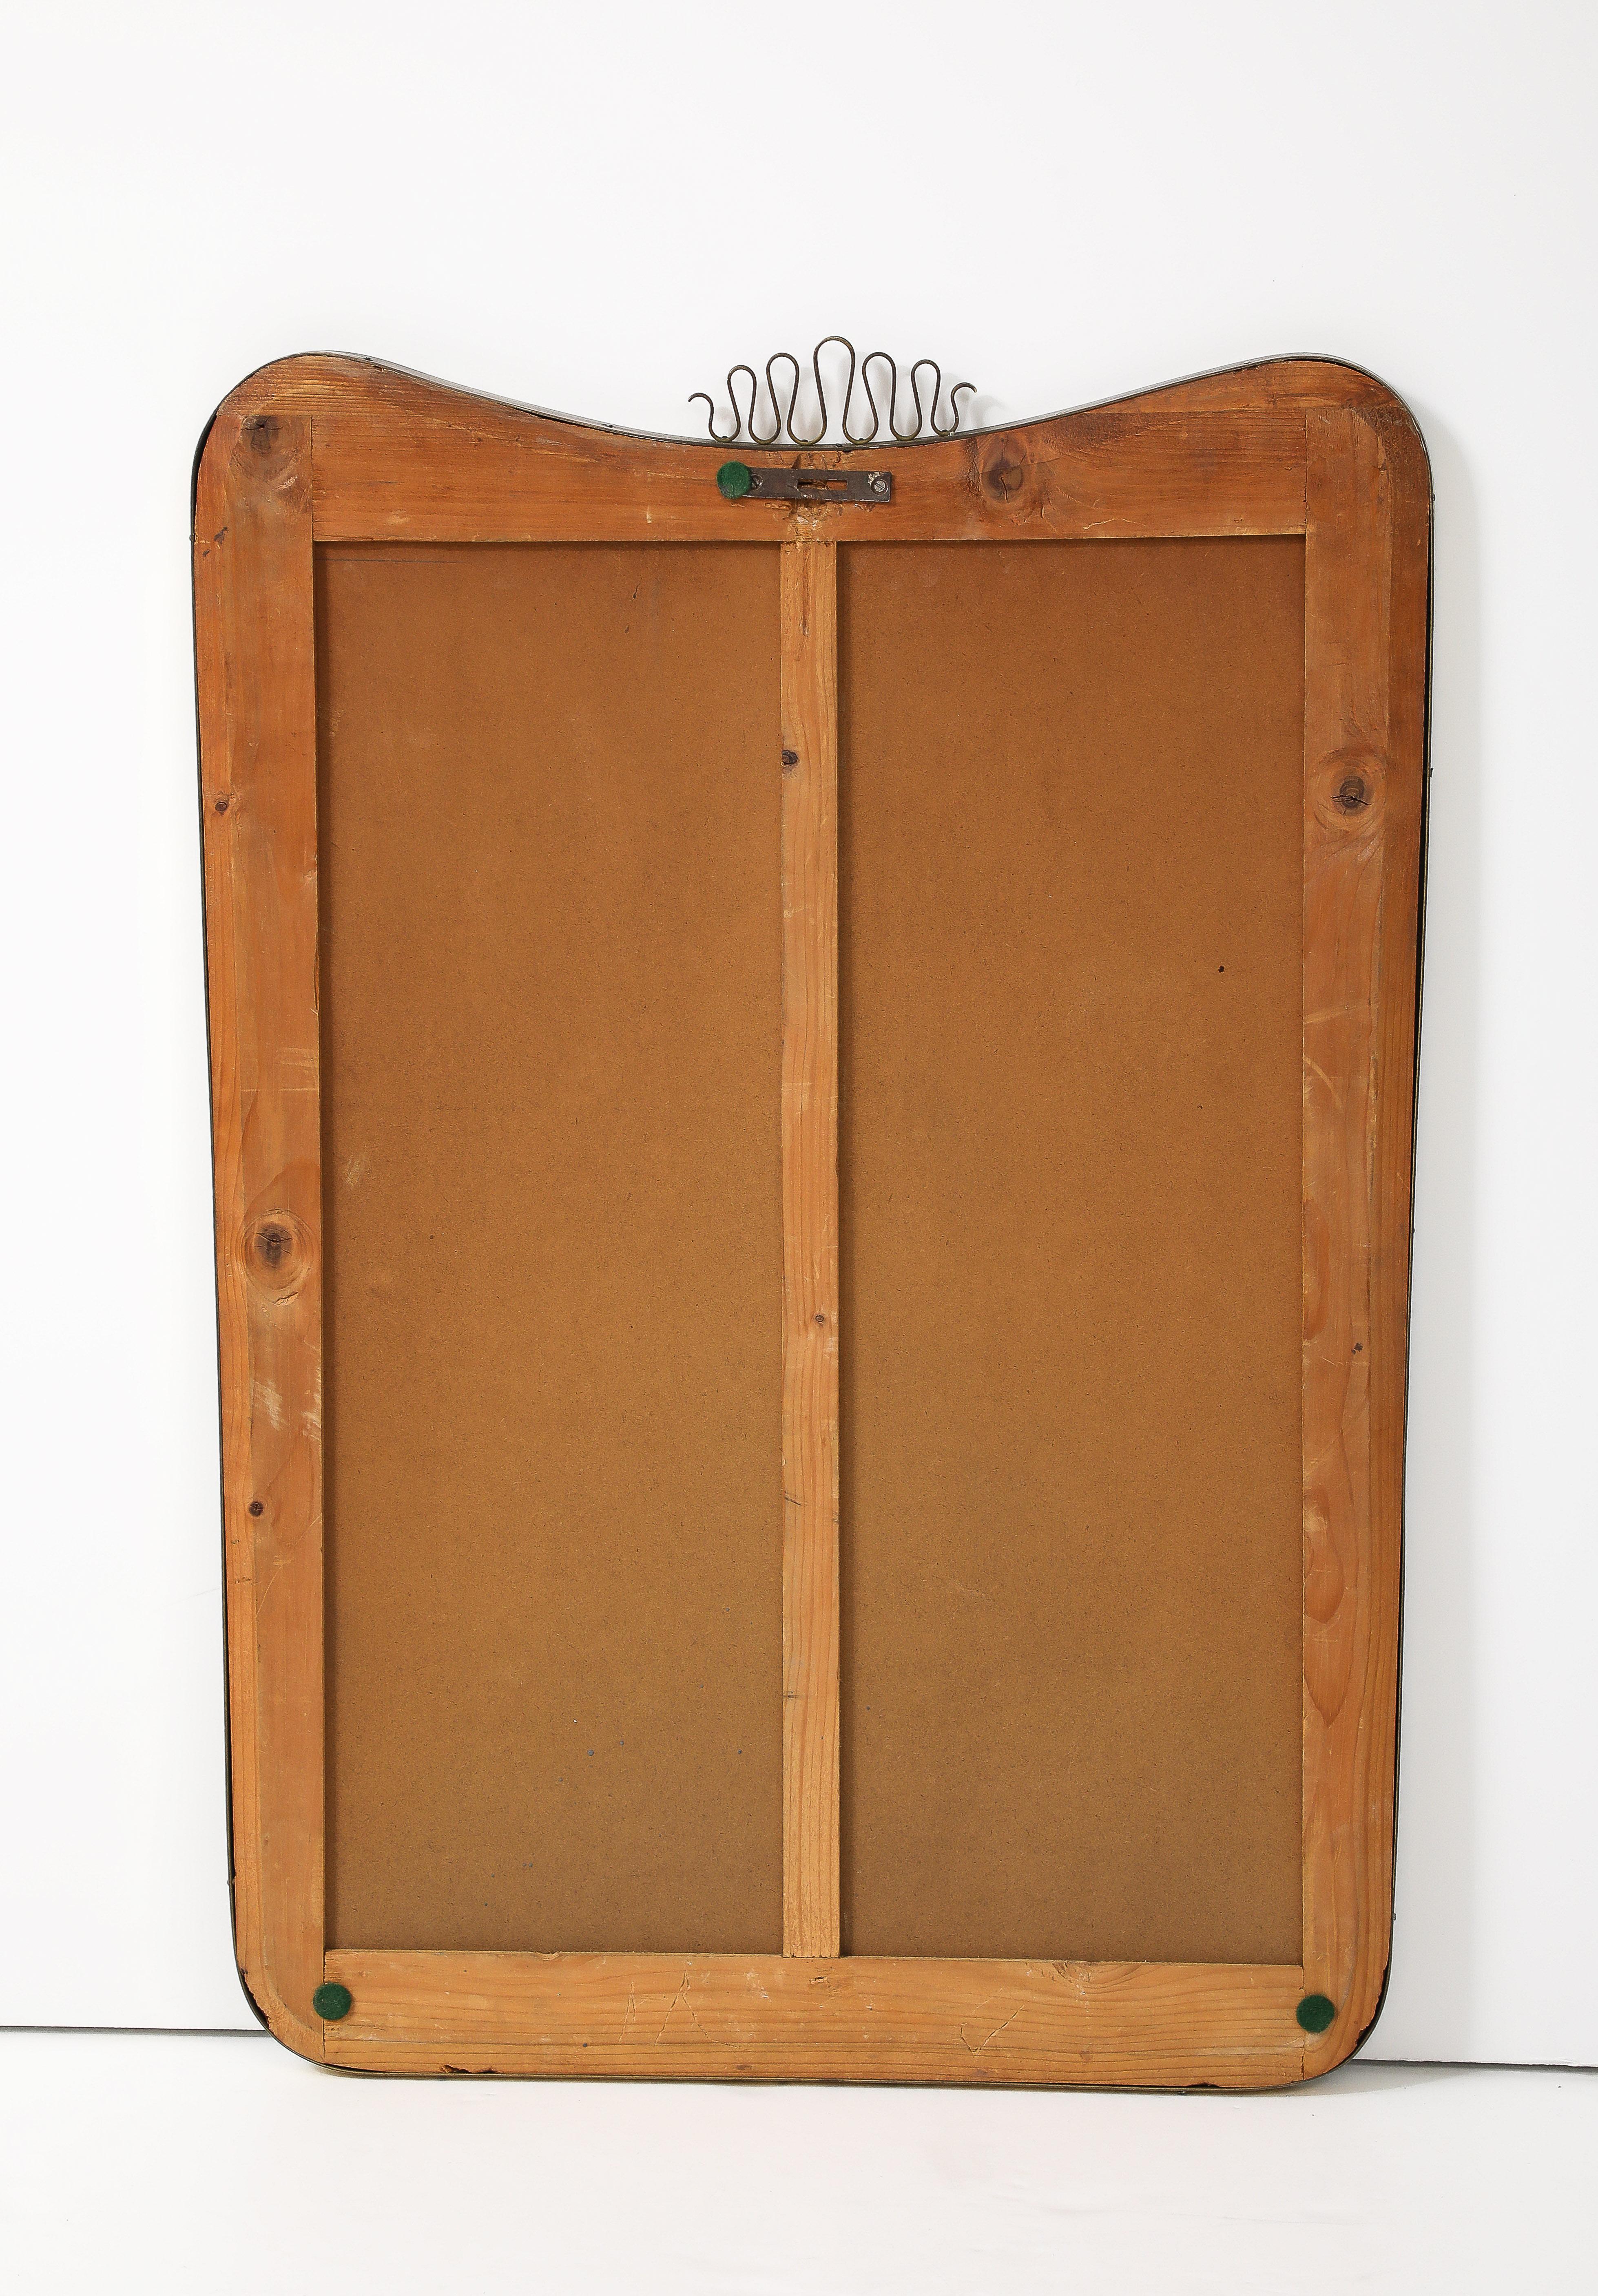 Midcentury Italian Modernist Scroll Top Brass Mirror in the Style of Gio Ponti For Sale 7